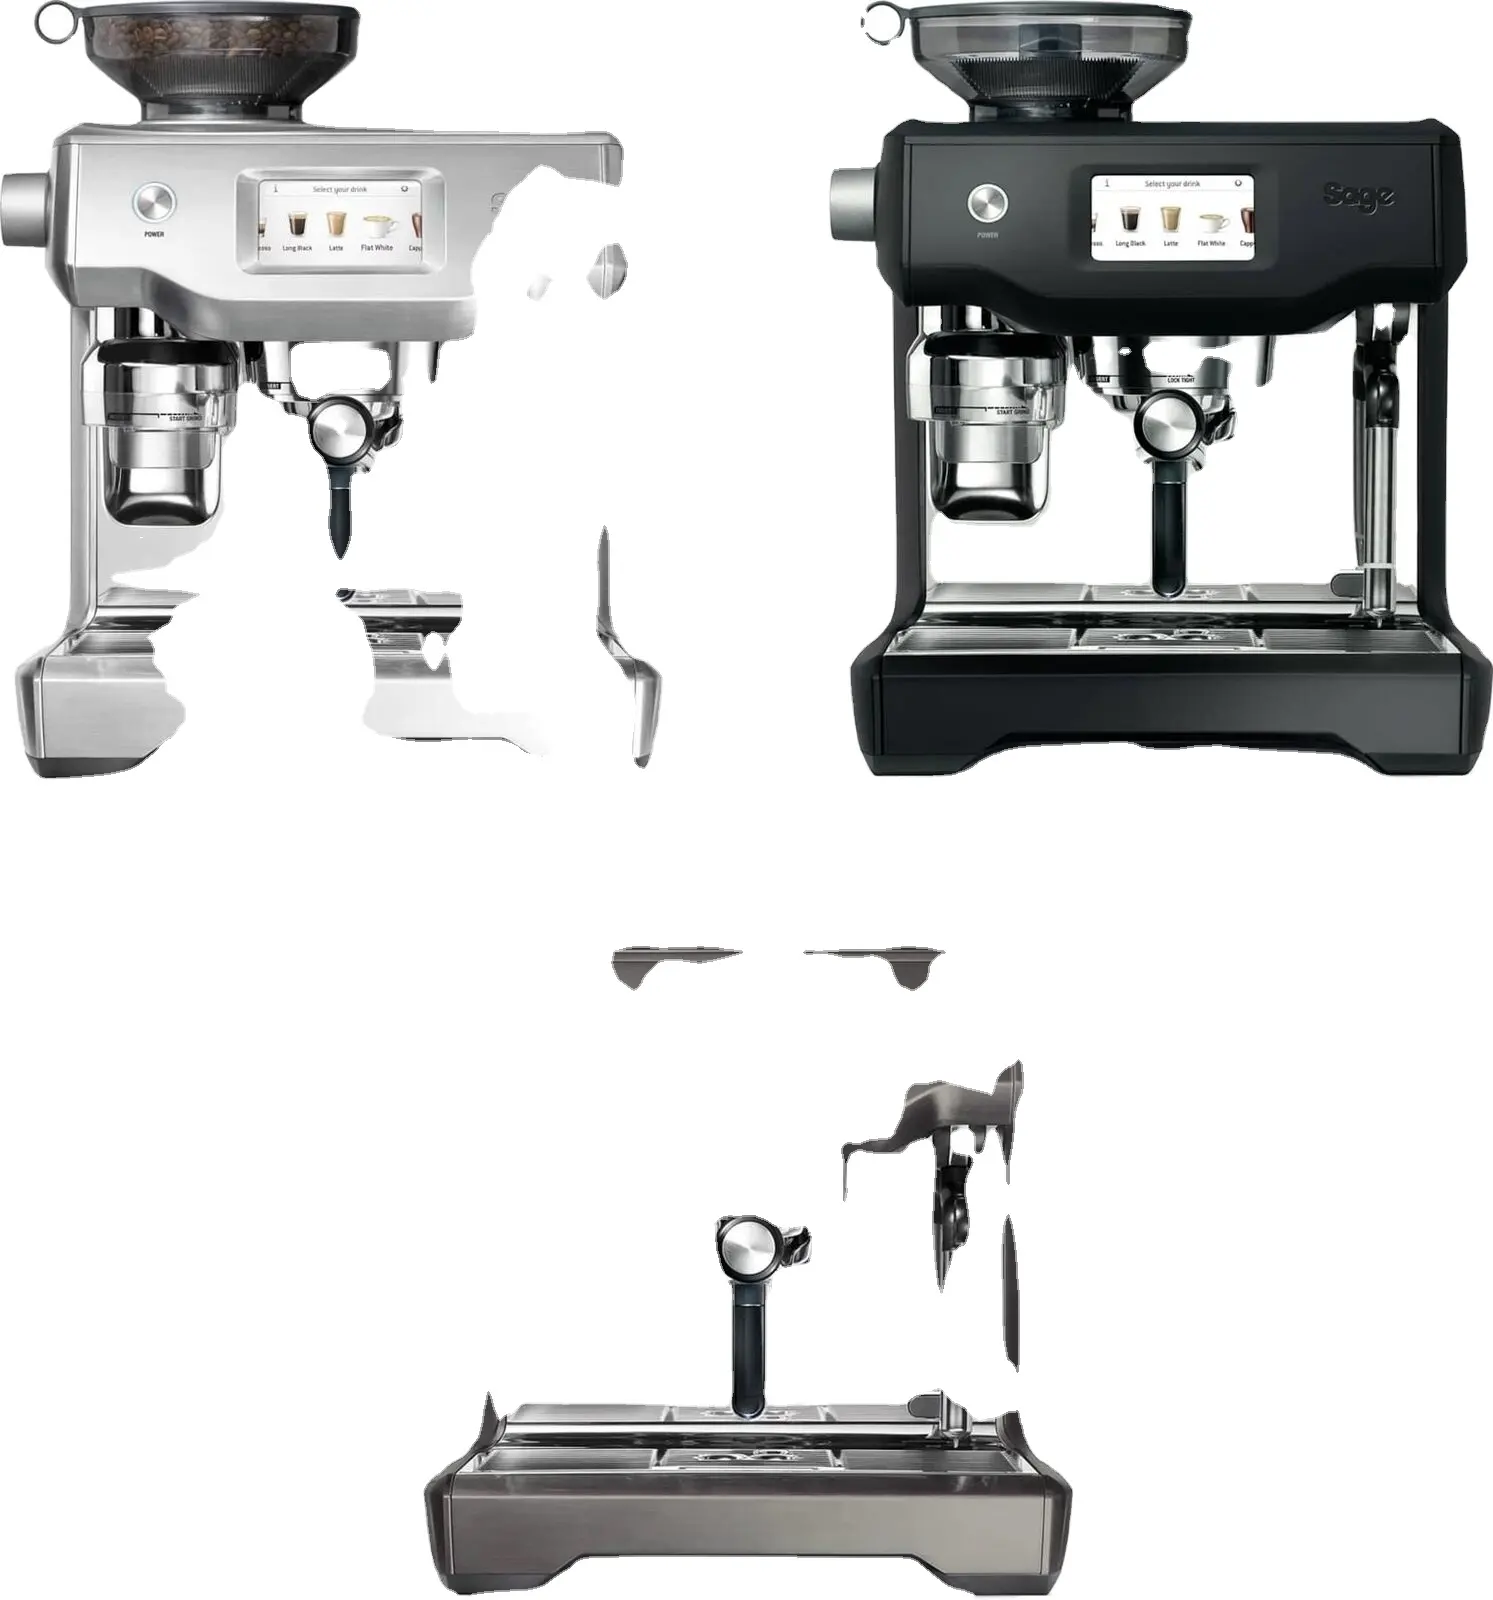 Hot selling New Breviller Oracle Touch Espresso Coffee Machine - Brushed Stainless Steel